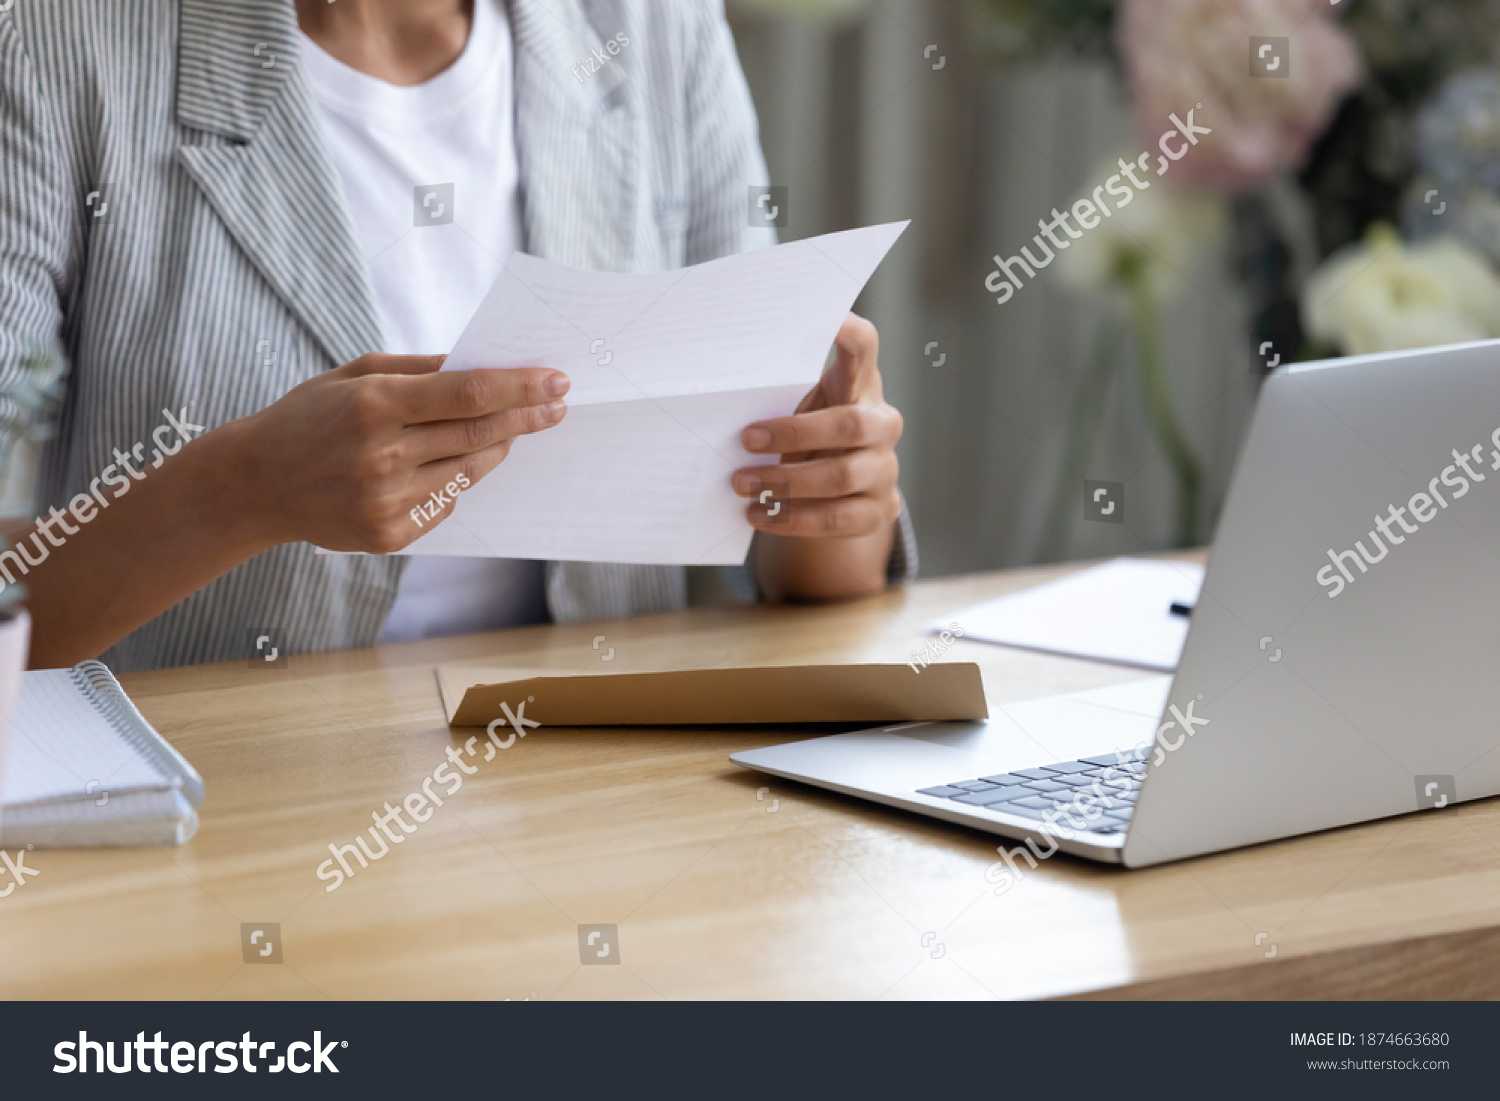 Getting news by mail. Close up of young lady involved in paperwork at home office studio hold paper letter in hands. Businesswoman get message out of envelop read information from bank client supplier #1874663680